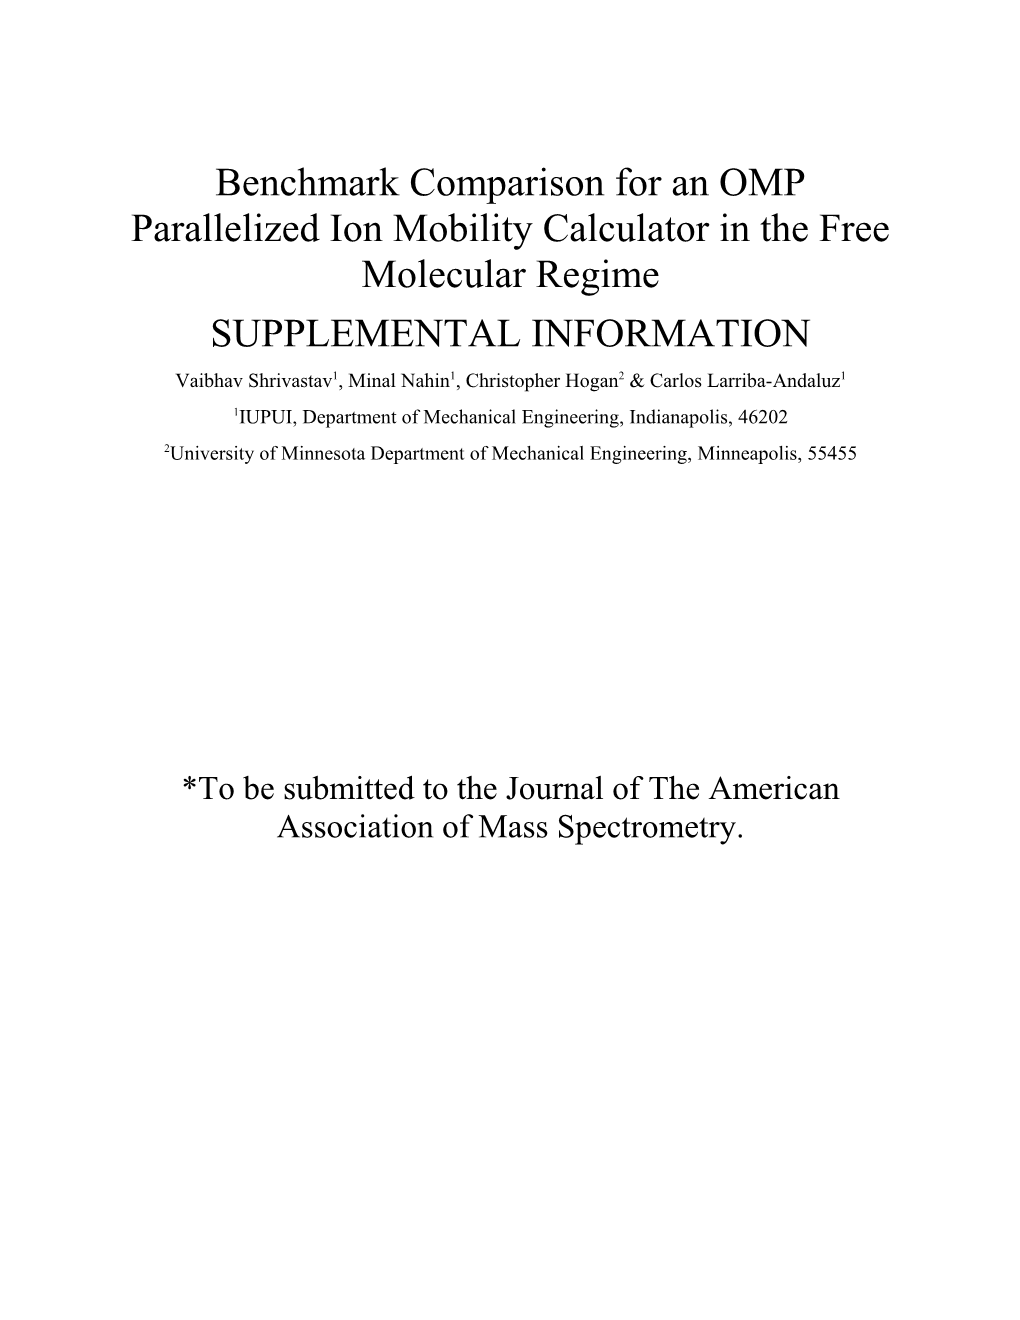 Benchmark Comparison for an OMP Parallelized Ion Mobility Calculator in the Free Molecular